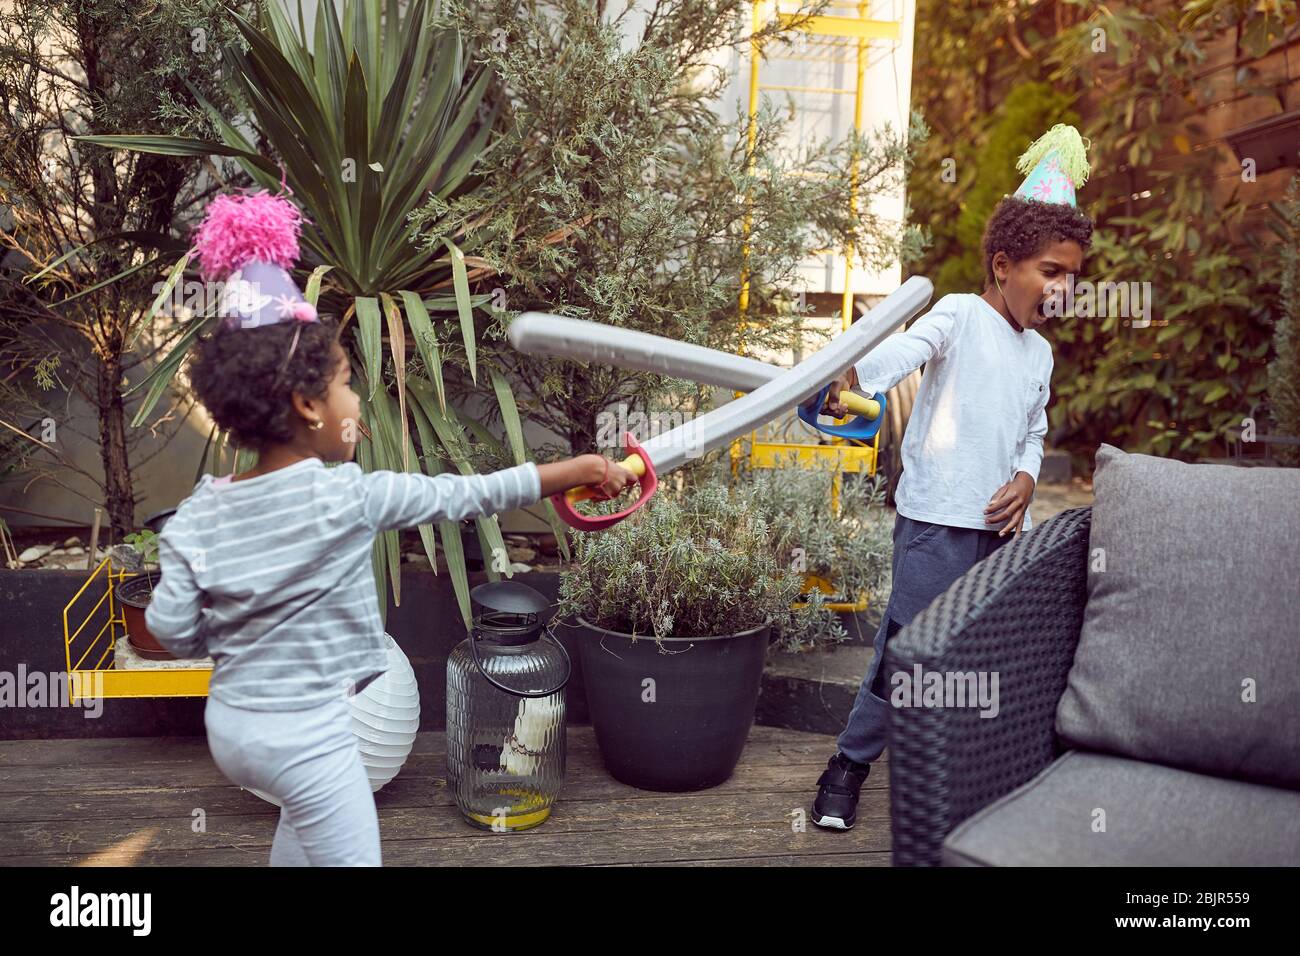 Afro-American boy and girl playing in the backyard with plastic swords, active Stock Photo